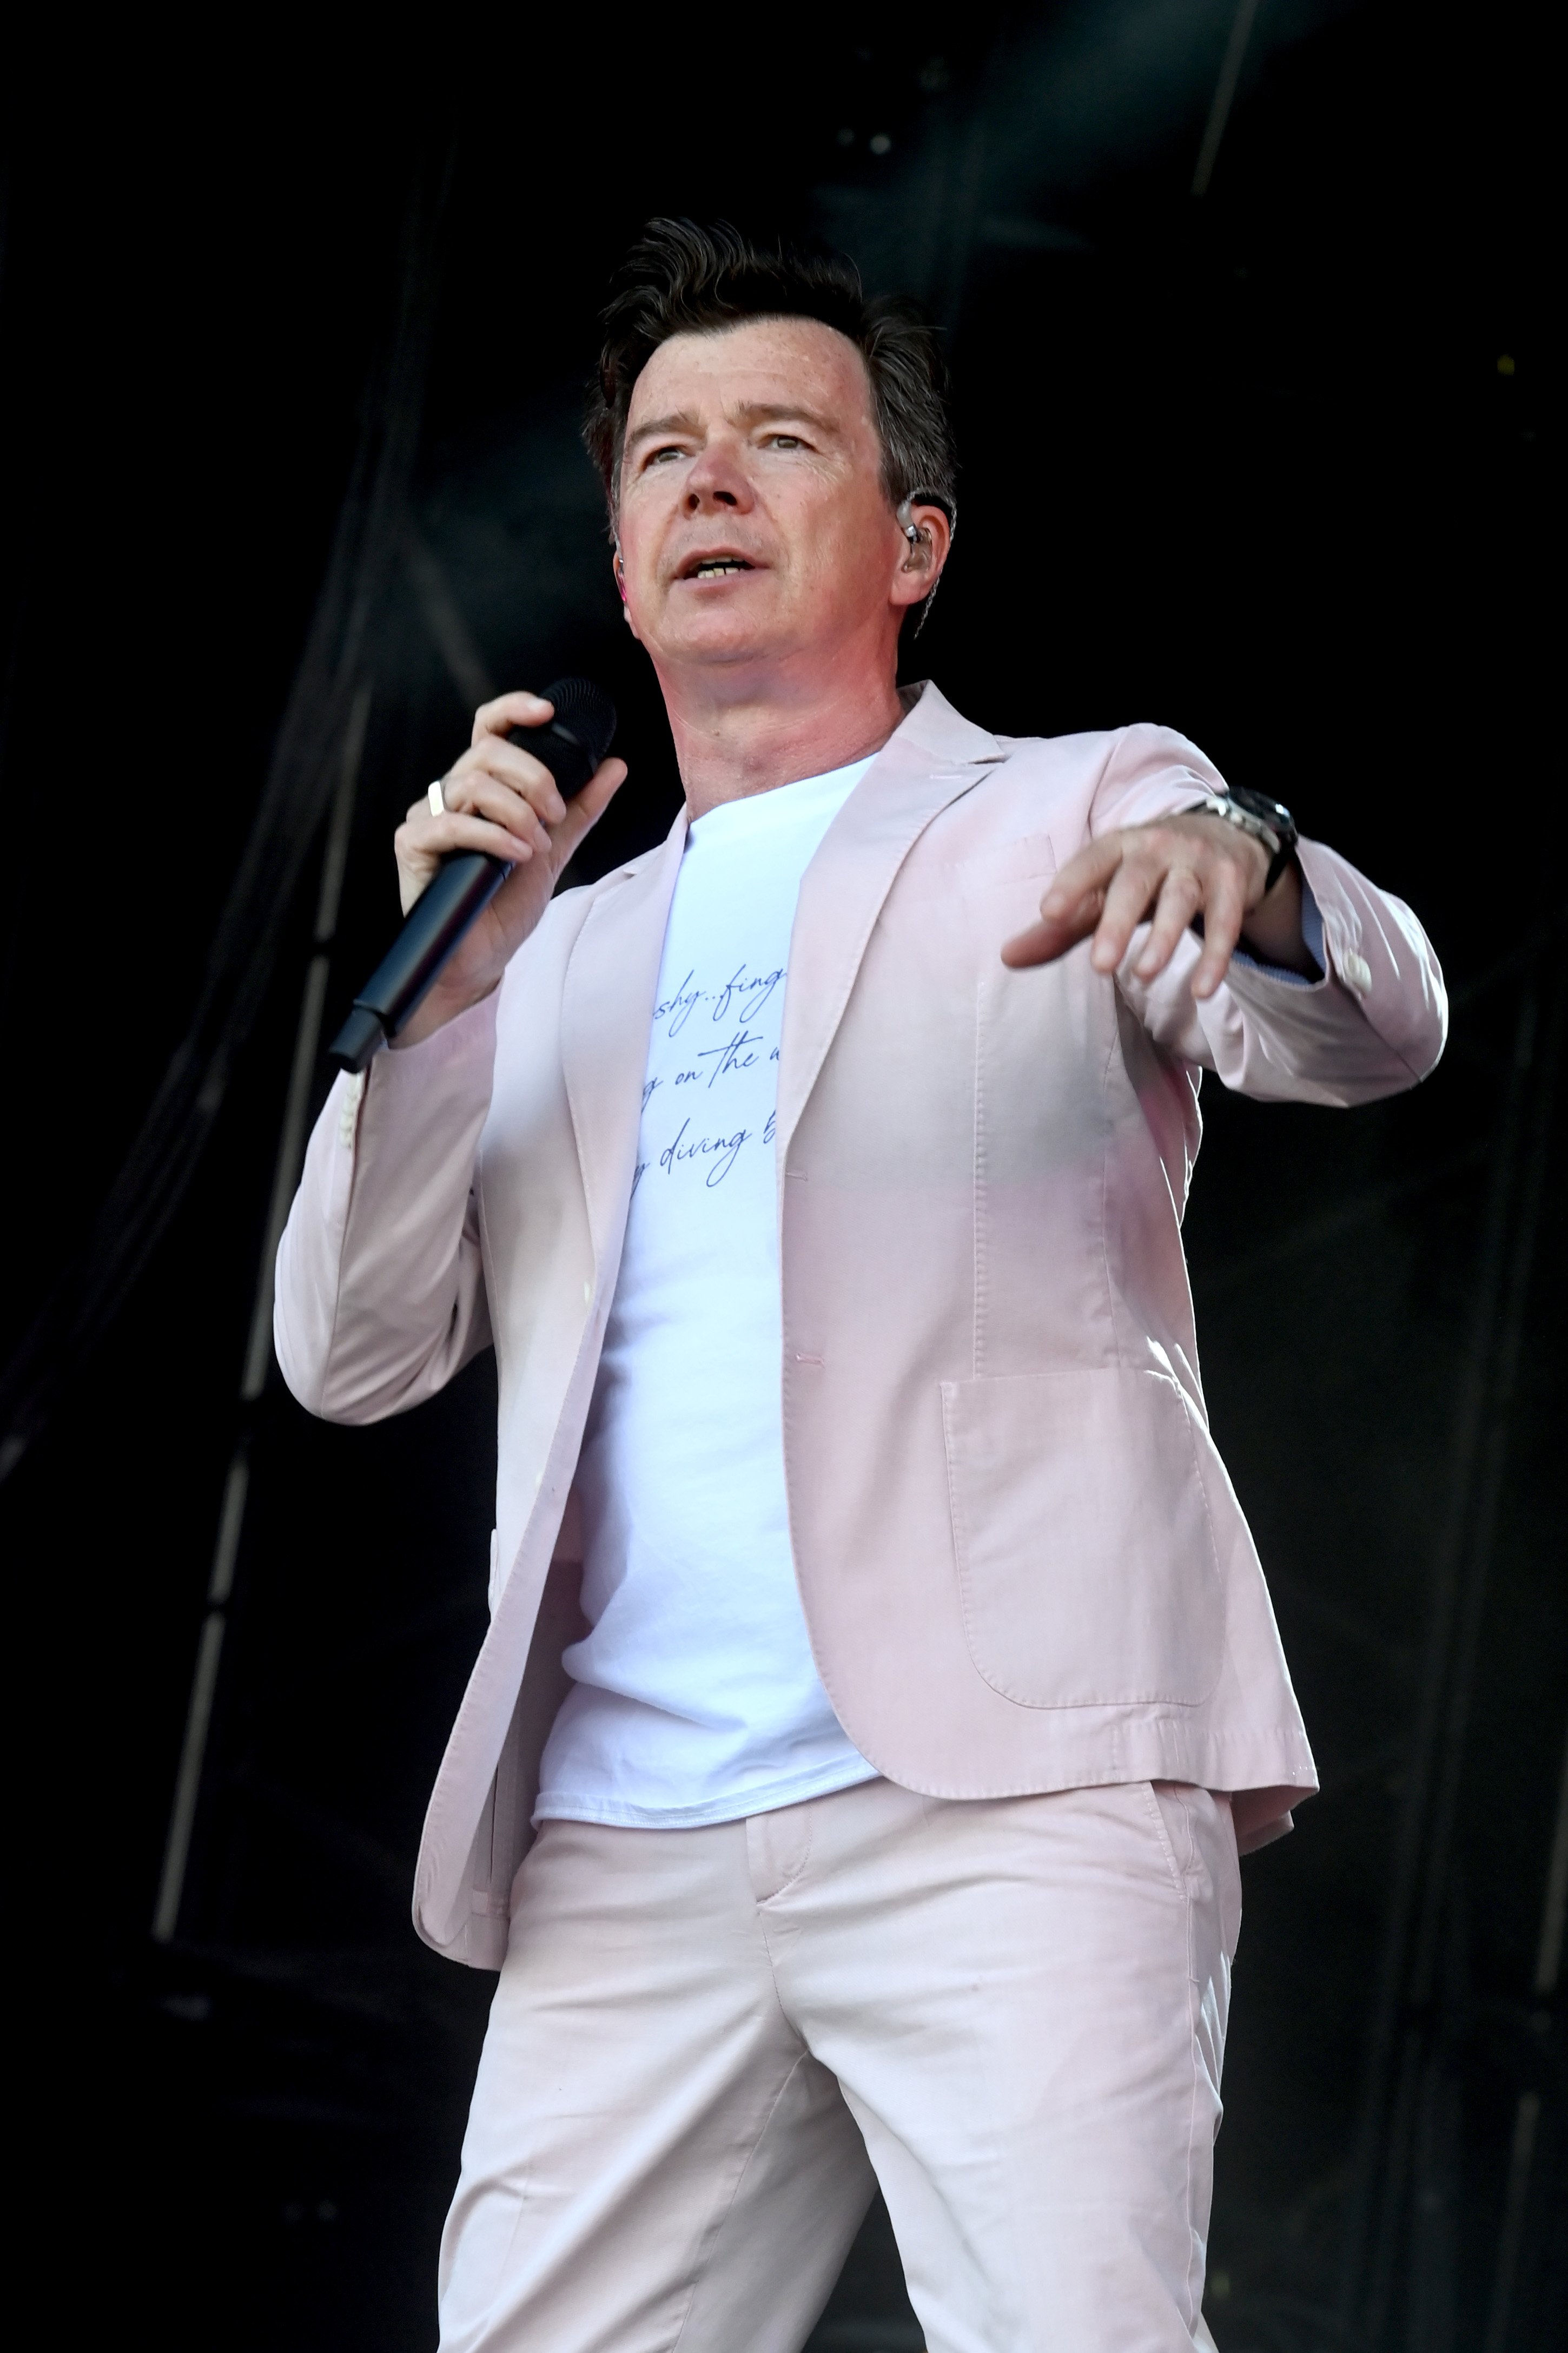 Rick Astley performing at Latitude Festival on July 25, 2021, in England. | Source: Getty Images